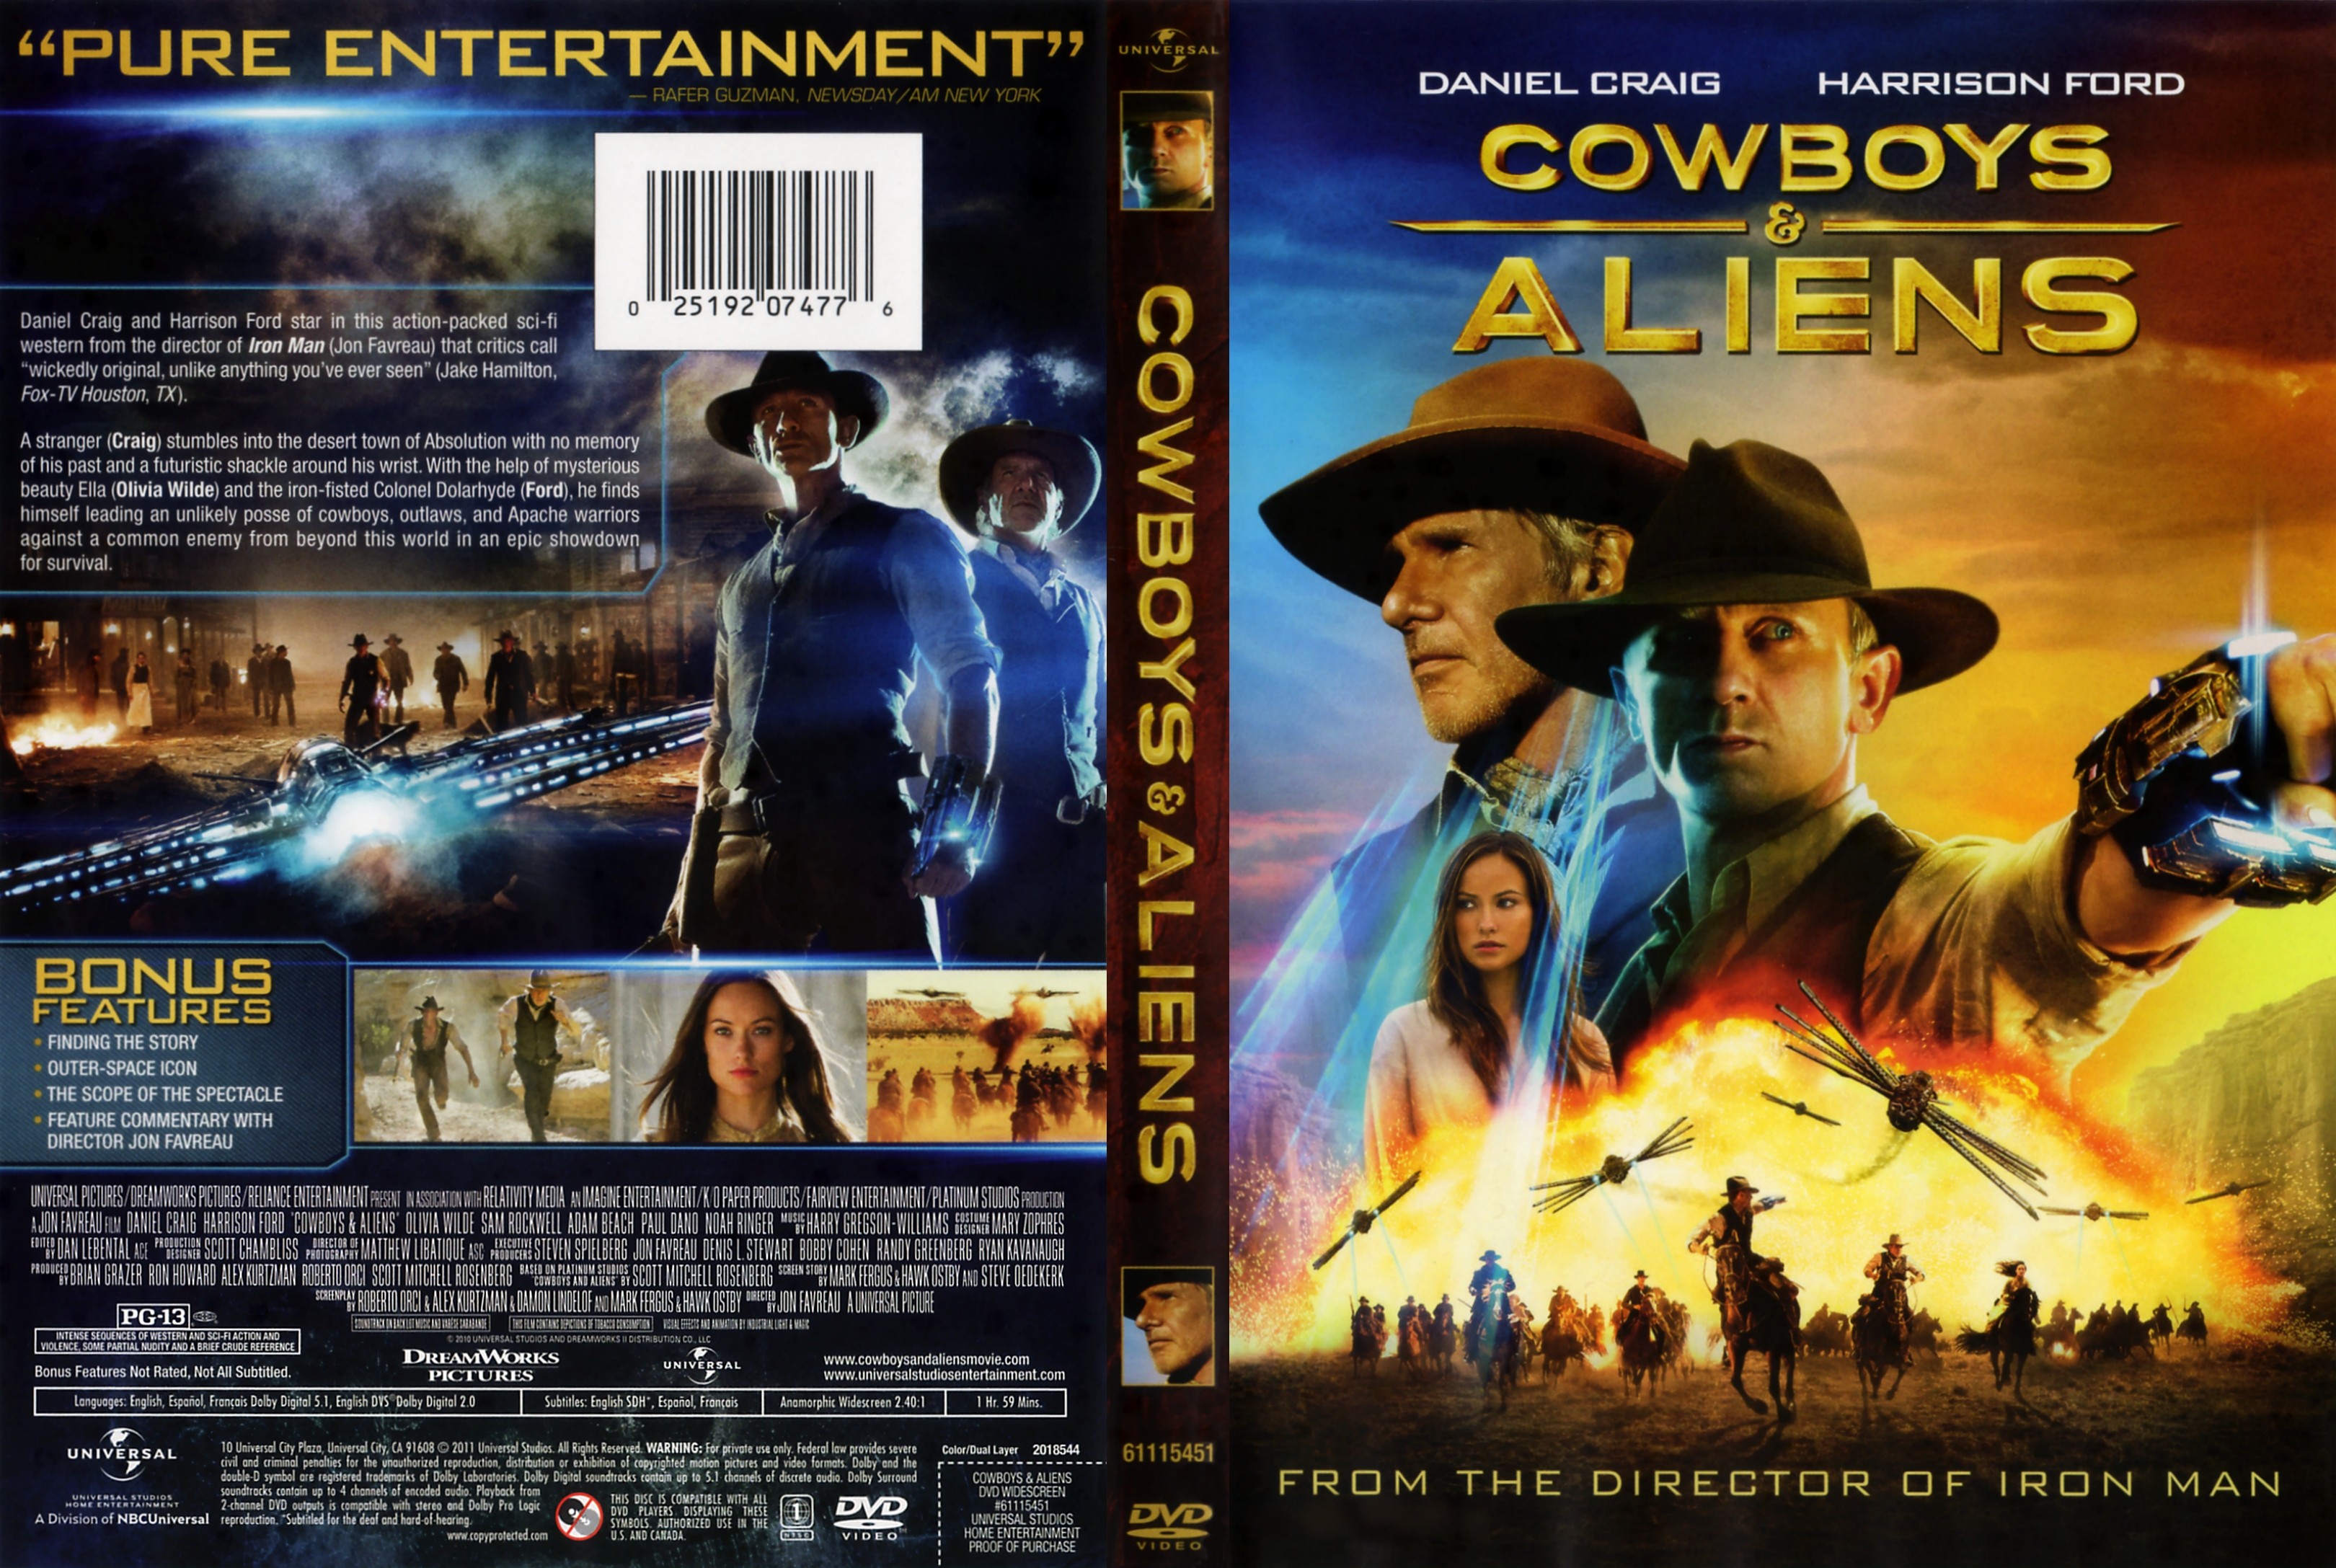 watch cowboys and aliens online free